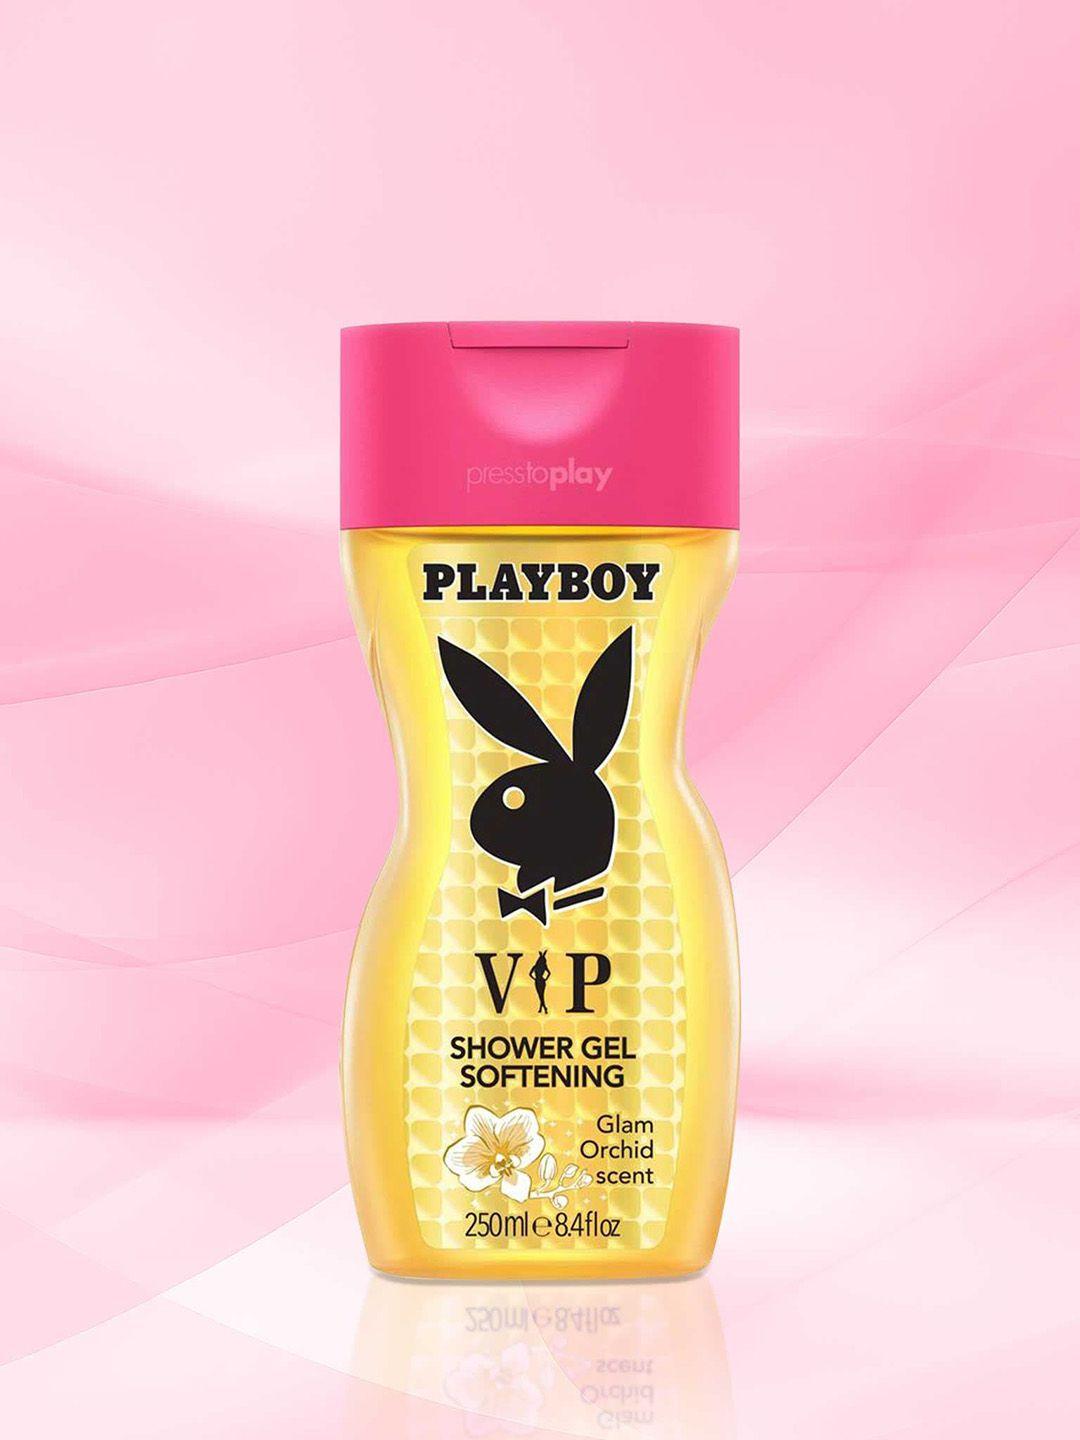 playboy vip softening shower gel with glam orchid scent - 250 ml